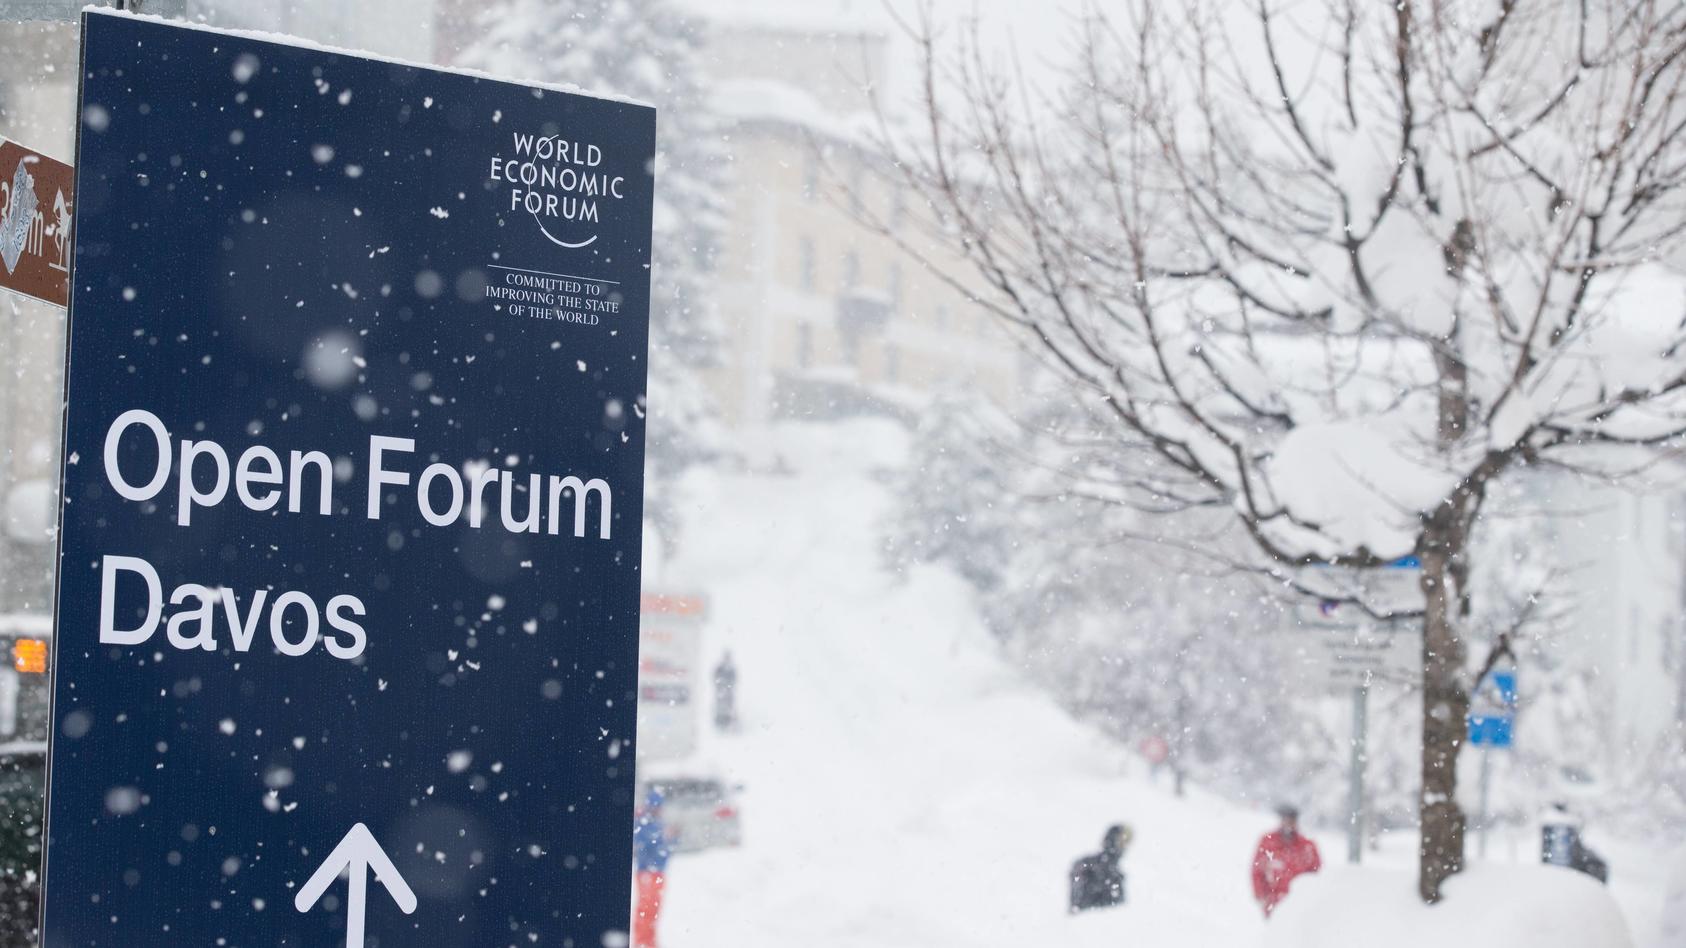 (180122) -- DAVOS (SWITZERLAND), Jan. 22, 2018 -- People walk in the snow in Davos, Switzerland, on Jan. 22, 2018. Davos, which is hosting world leaders for the Jan. 23-26 annual meeting of the World Economic Forum (WEF), was also affected by heavy s